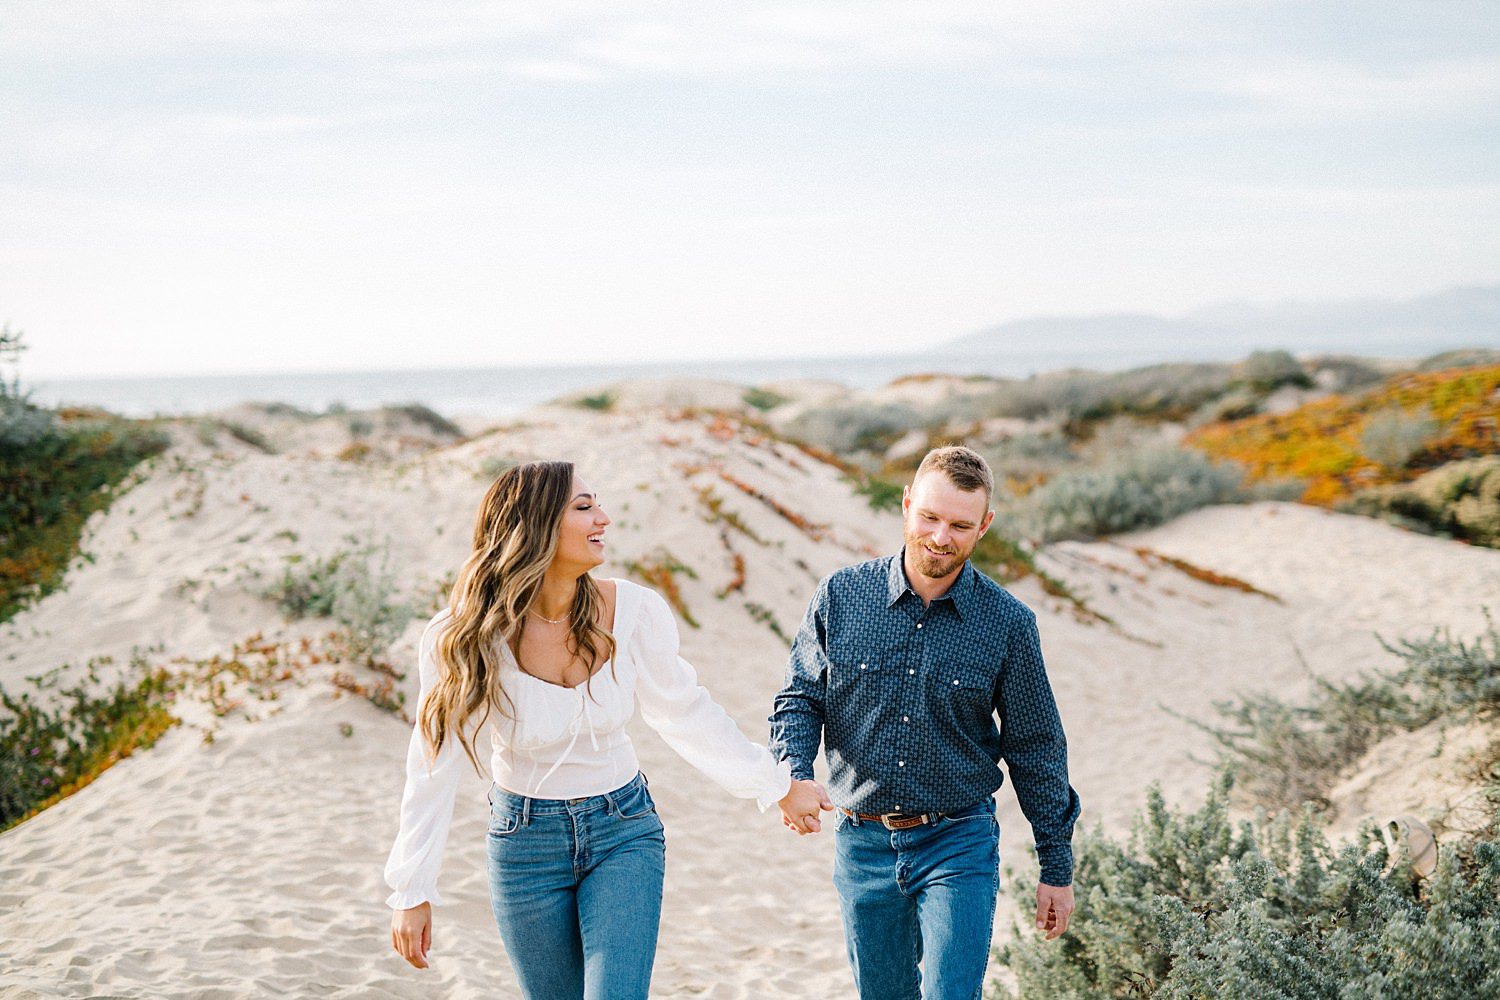 Couple holding hands running through Pismo Beach dunes with Pacific Ocean in background by Pismo Beach Engagement Photographer Austyn Elizabeth Photography